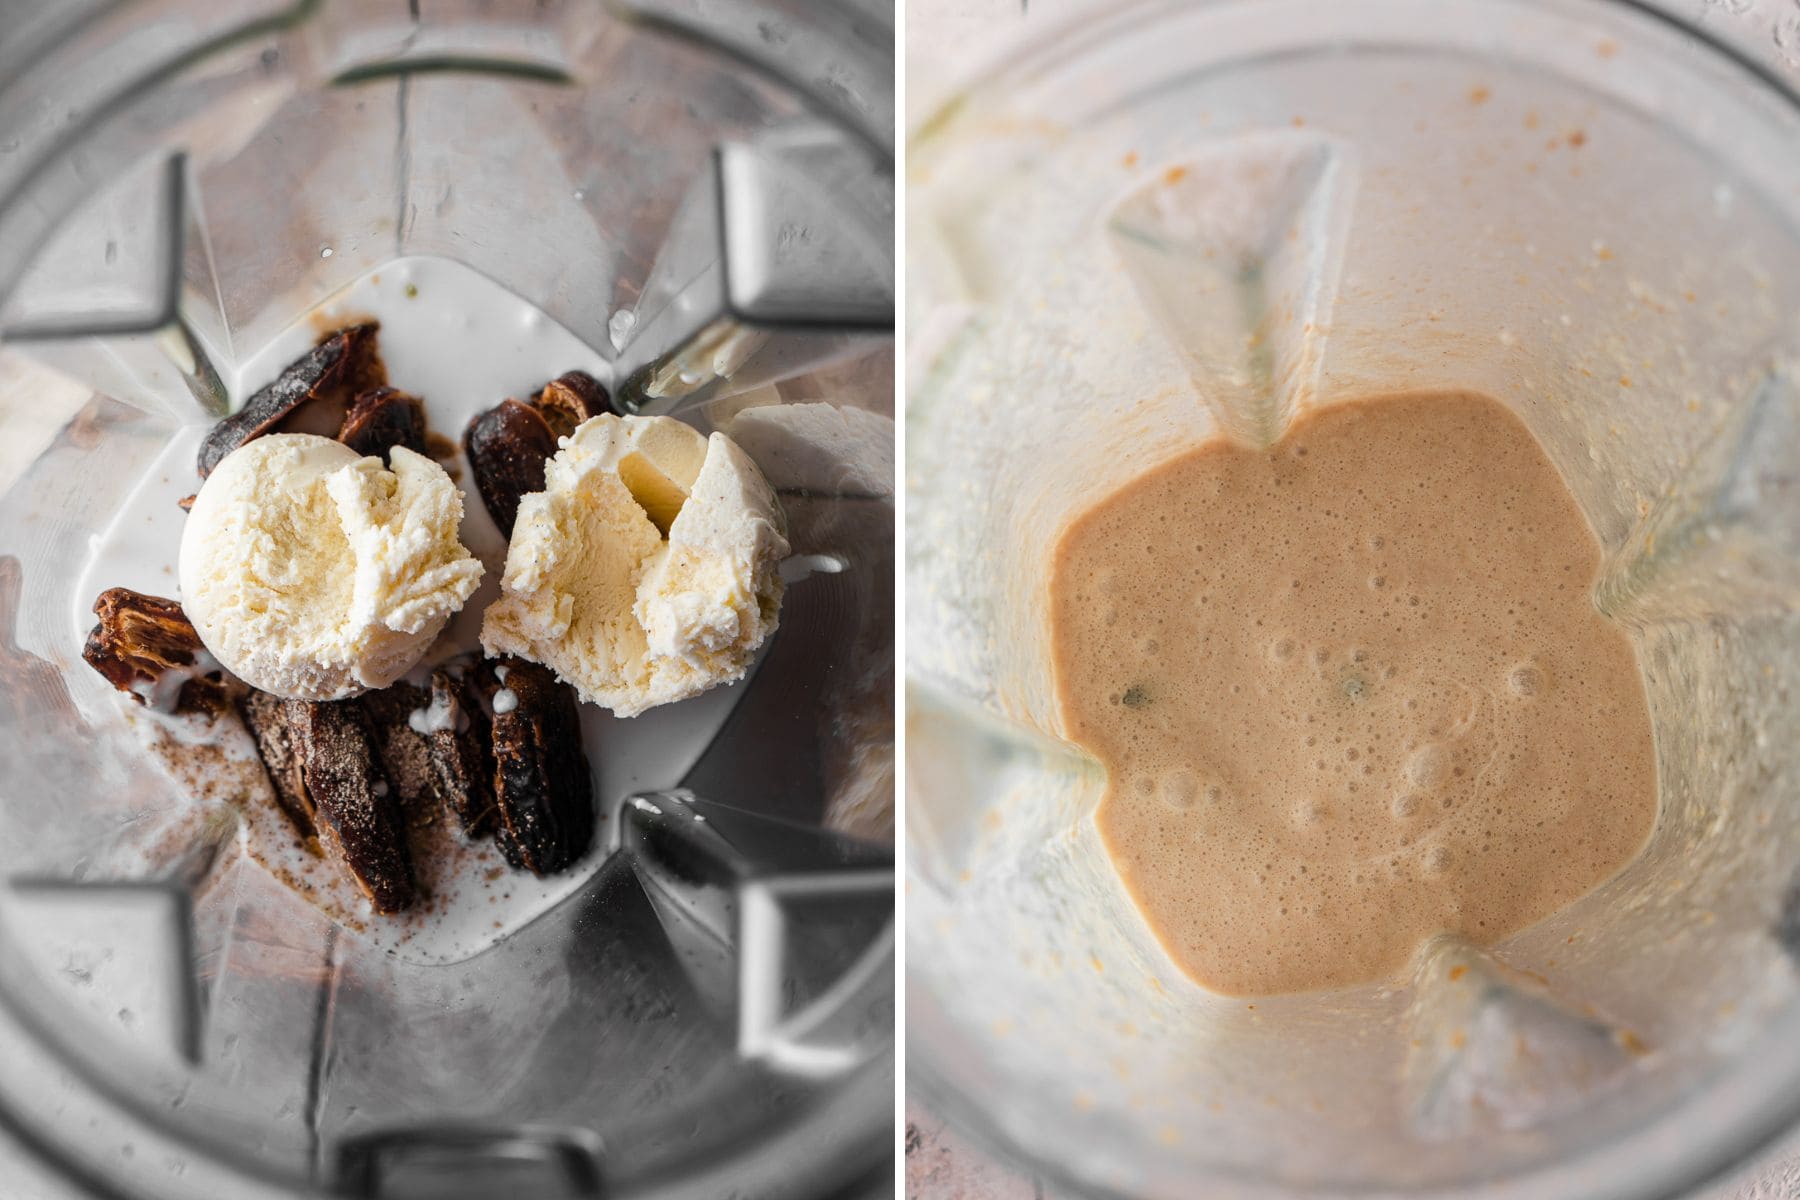 Ingredients for date shake in blender, then blended smooth as a collage.